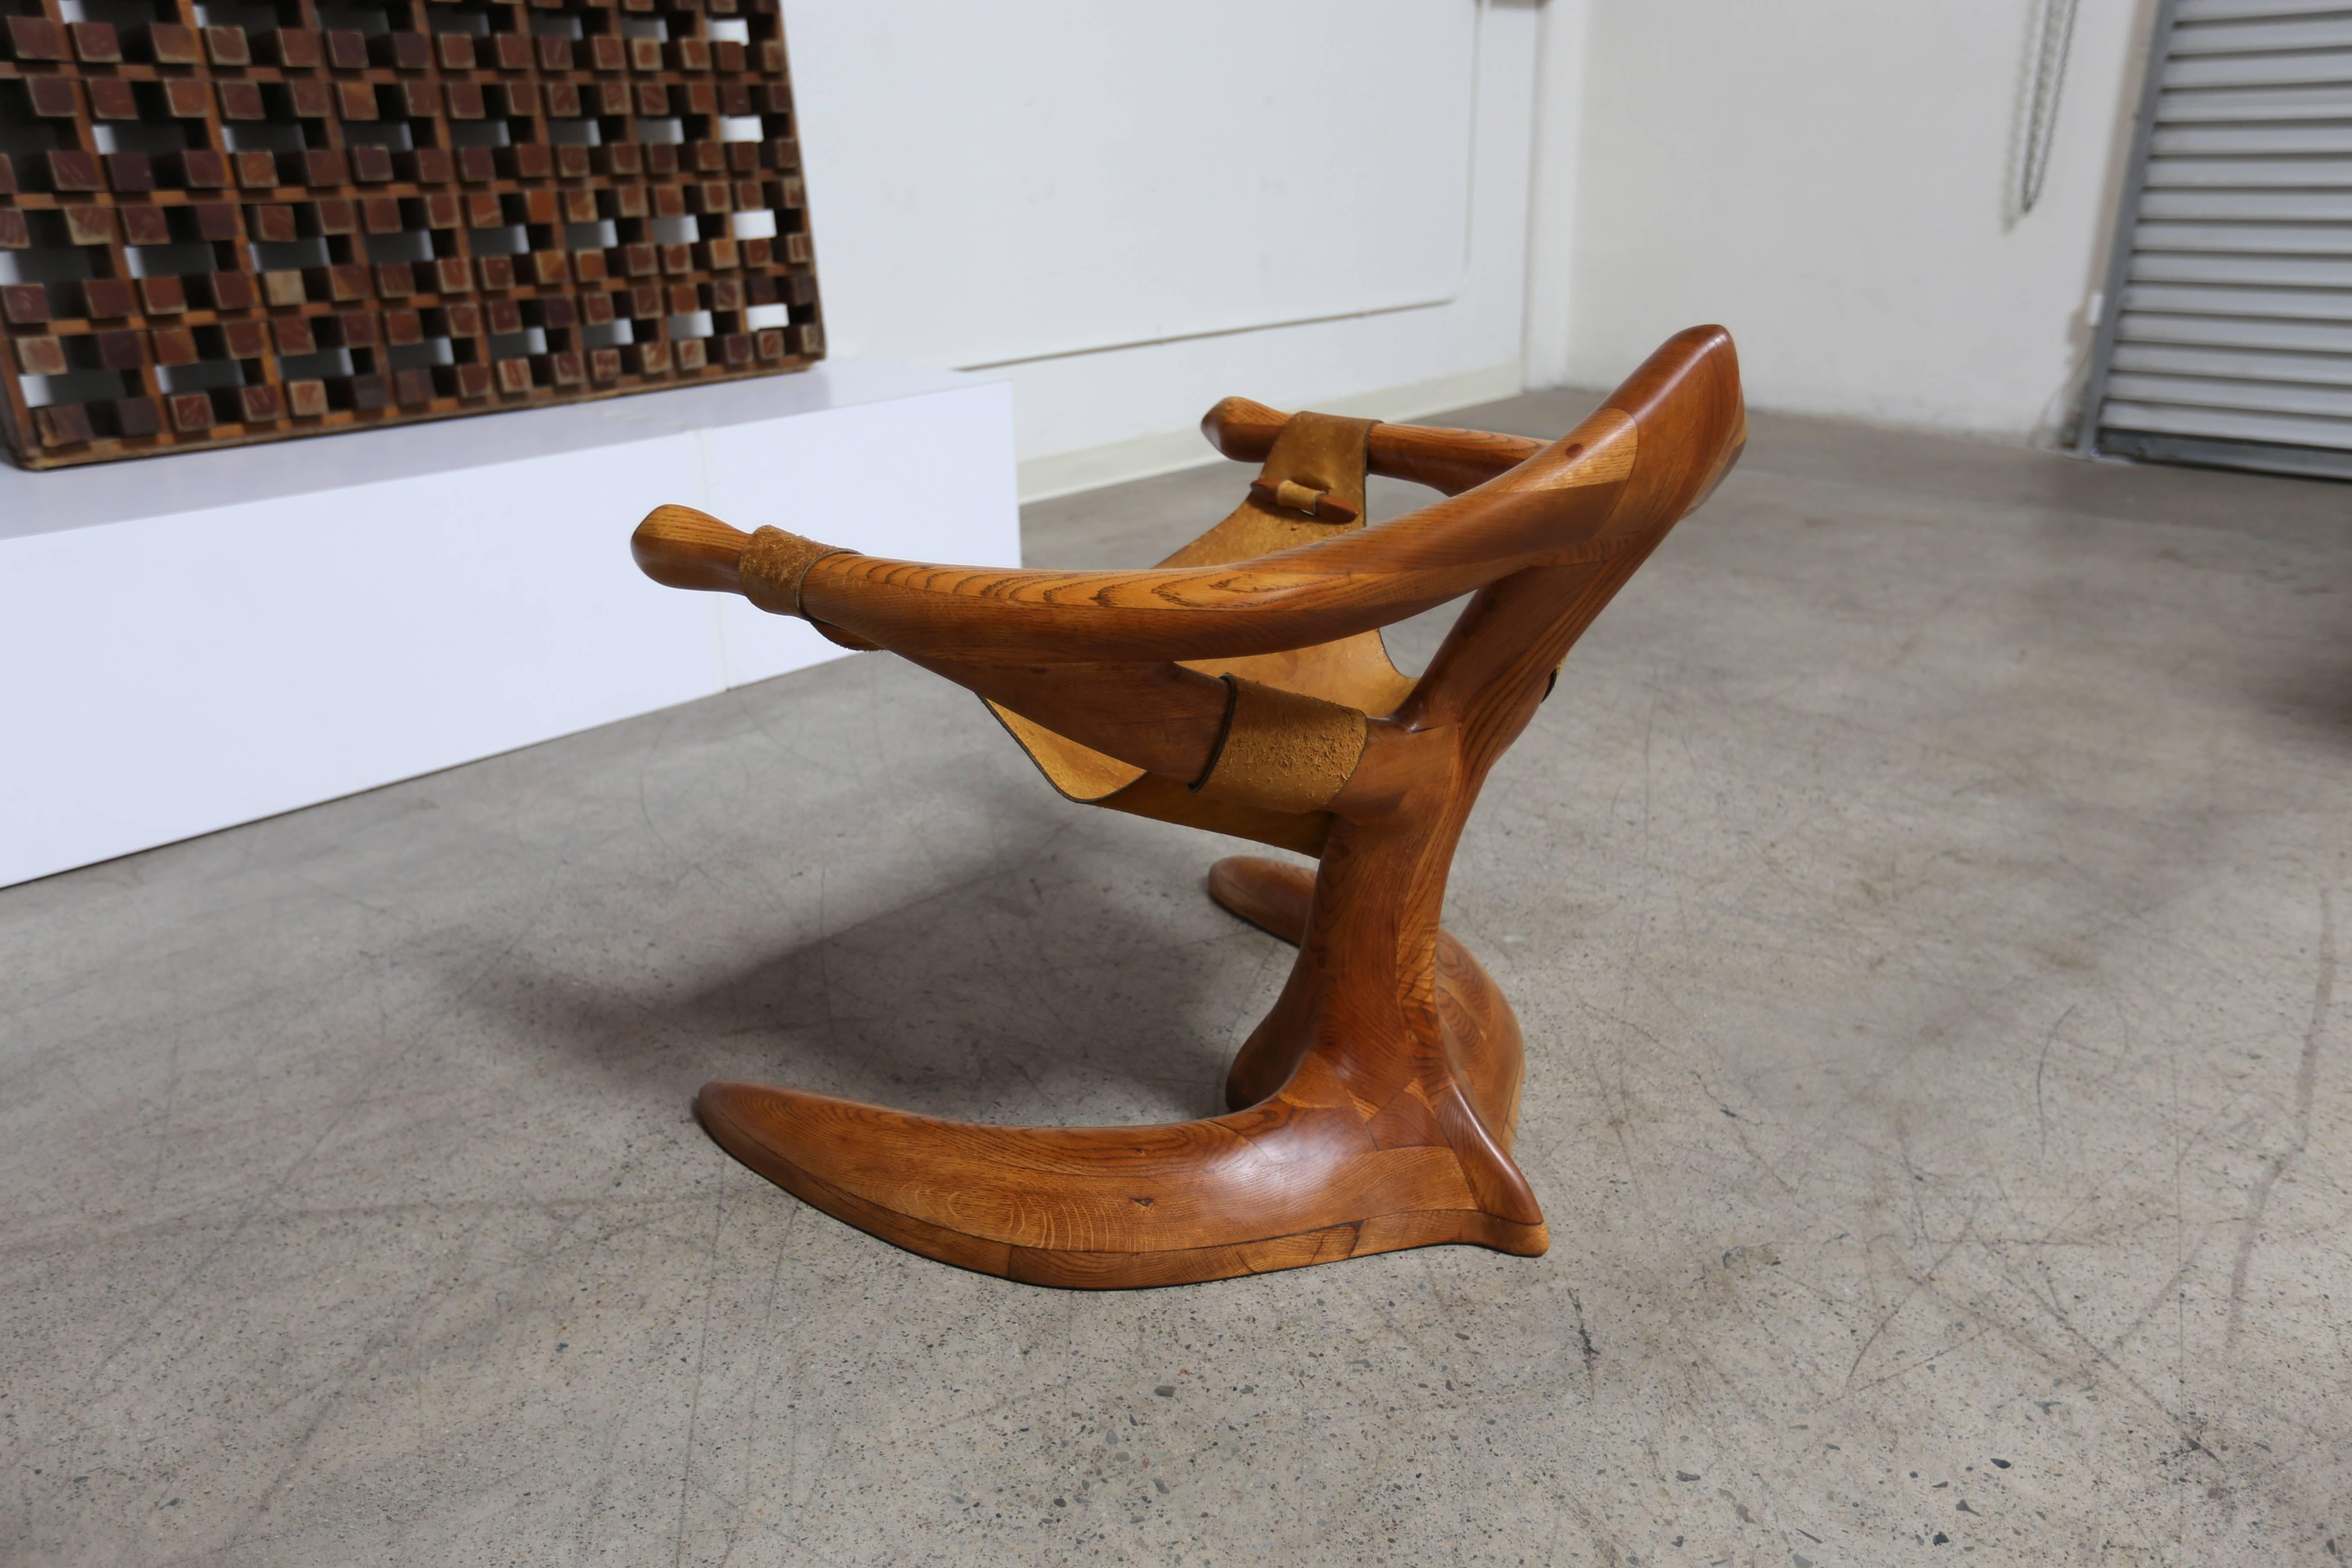 Studio crafted lounge chair by Californian woodworker Tim Crowder.